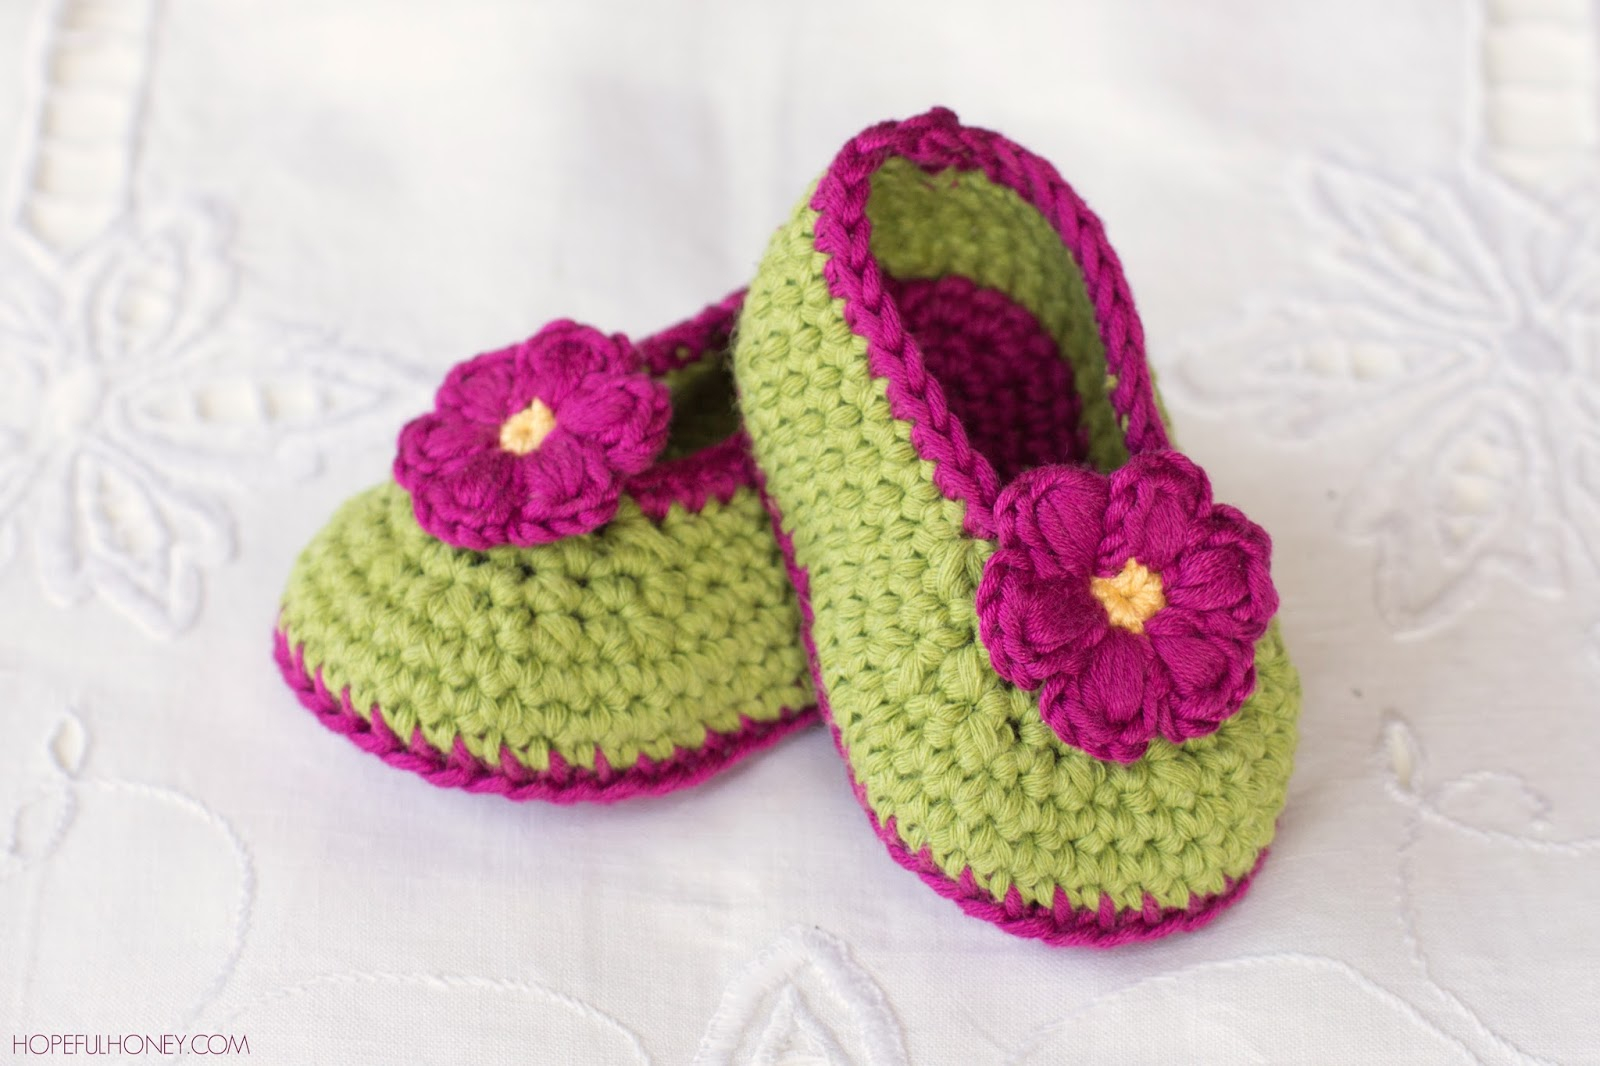 Basic Baby Booties Knitting Pattern Easy To Make Crochet Booties Crochet And Knitting Patterns 2019